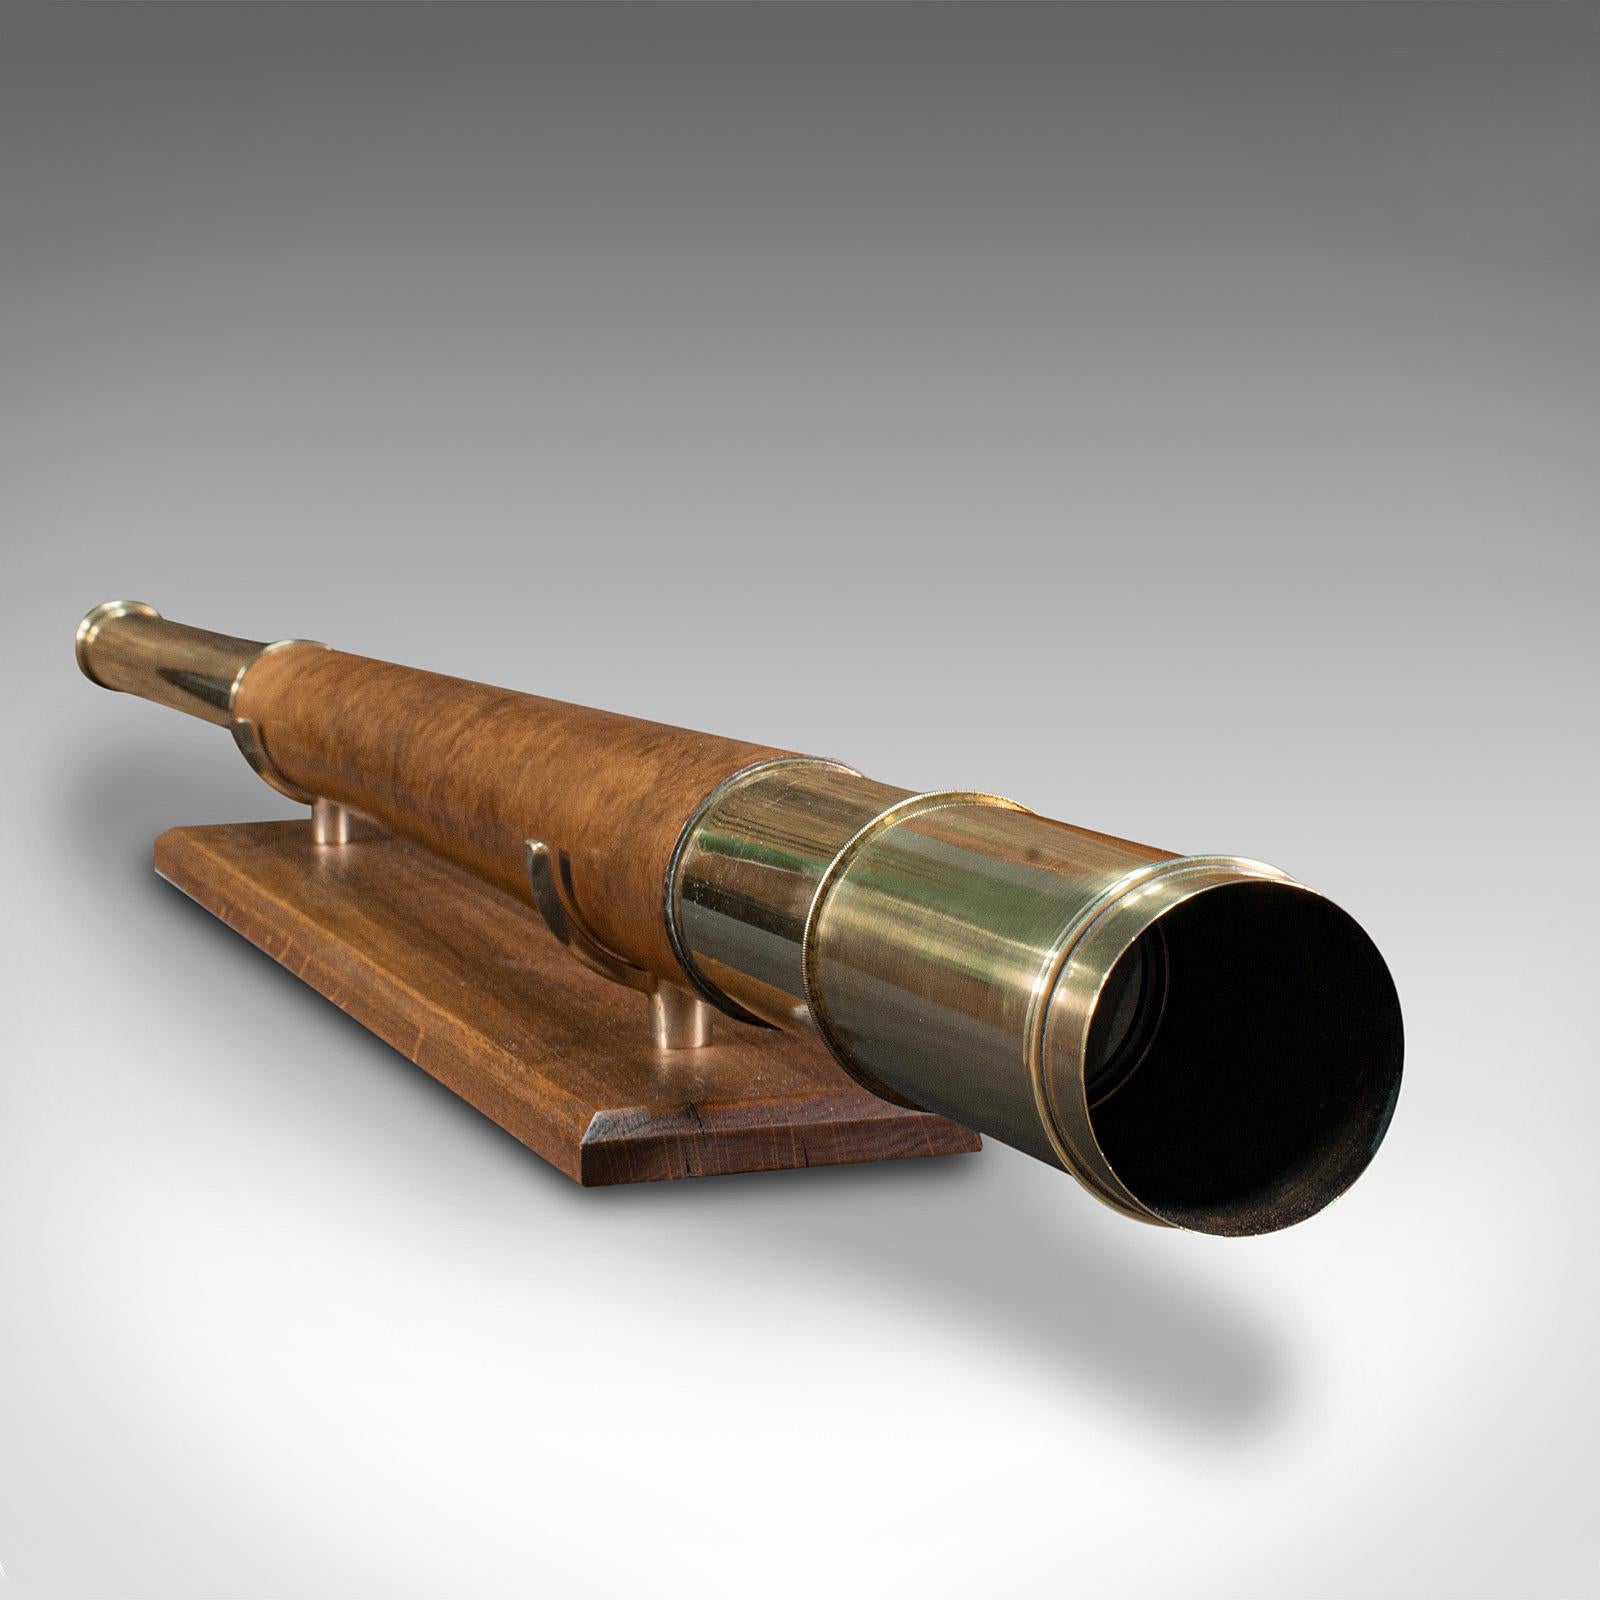 Antique Terrestrial Telescope, English, Single Draw Refractor, NSL, Victorian In Good Condition For Sale In Hele, Devon, GB